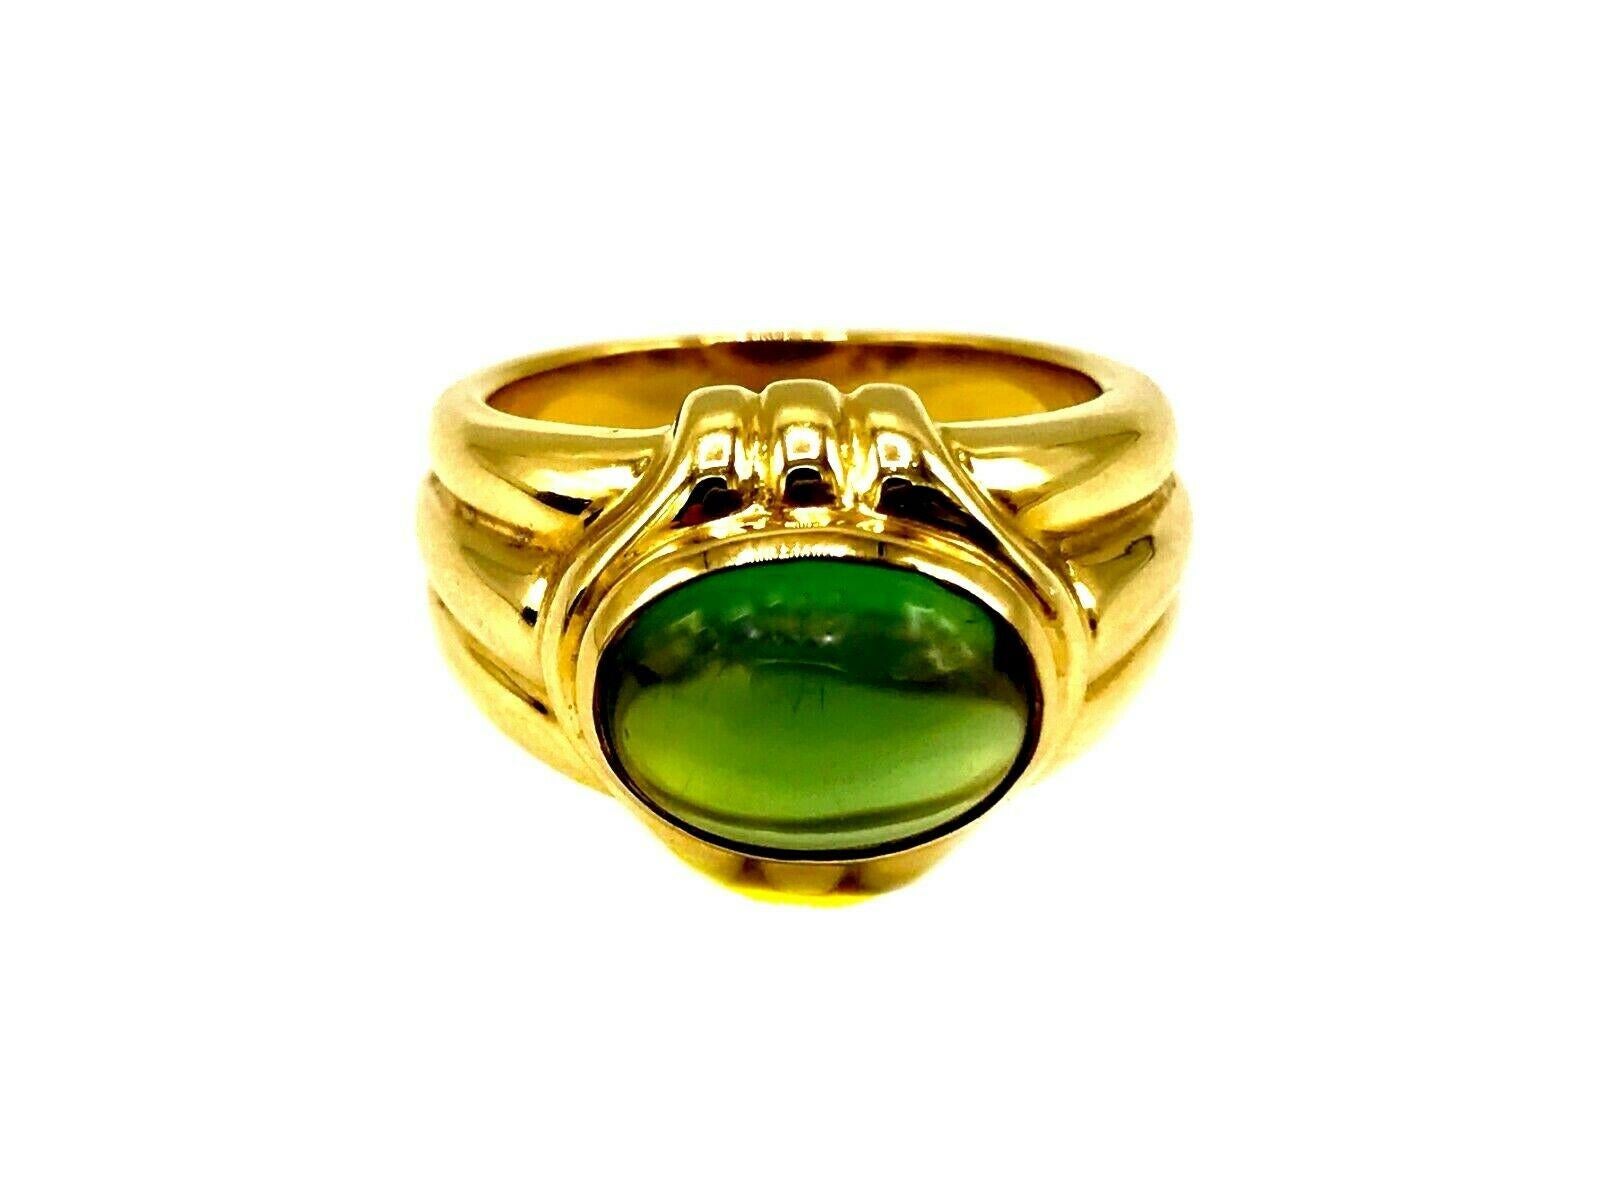 Vintage Bulgari ring made of 18k yellow gold featuring cabochon cut peridot. Stamped with the Bulgari maker's mark and a hallmark for 18k gold. 
Measurements: the ring size is 6.75 (sizable). Height is 1/2